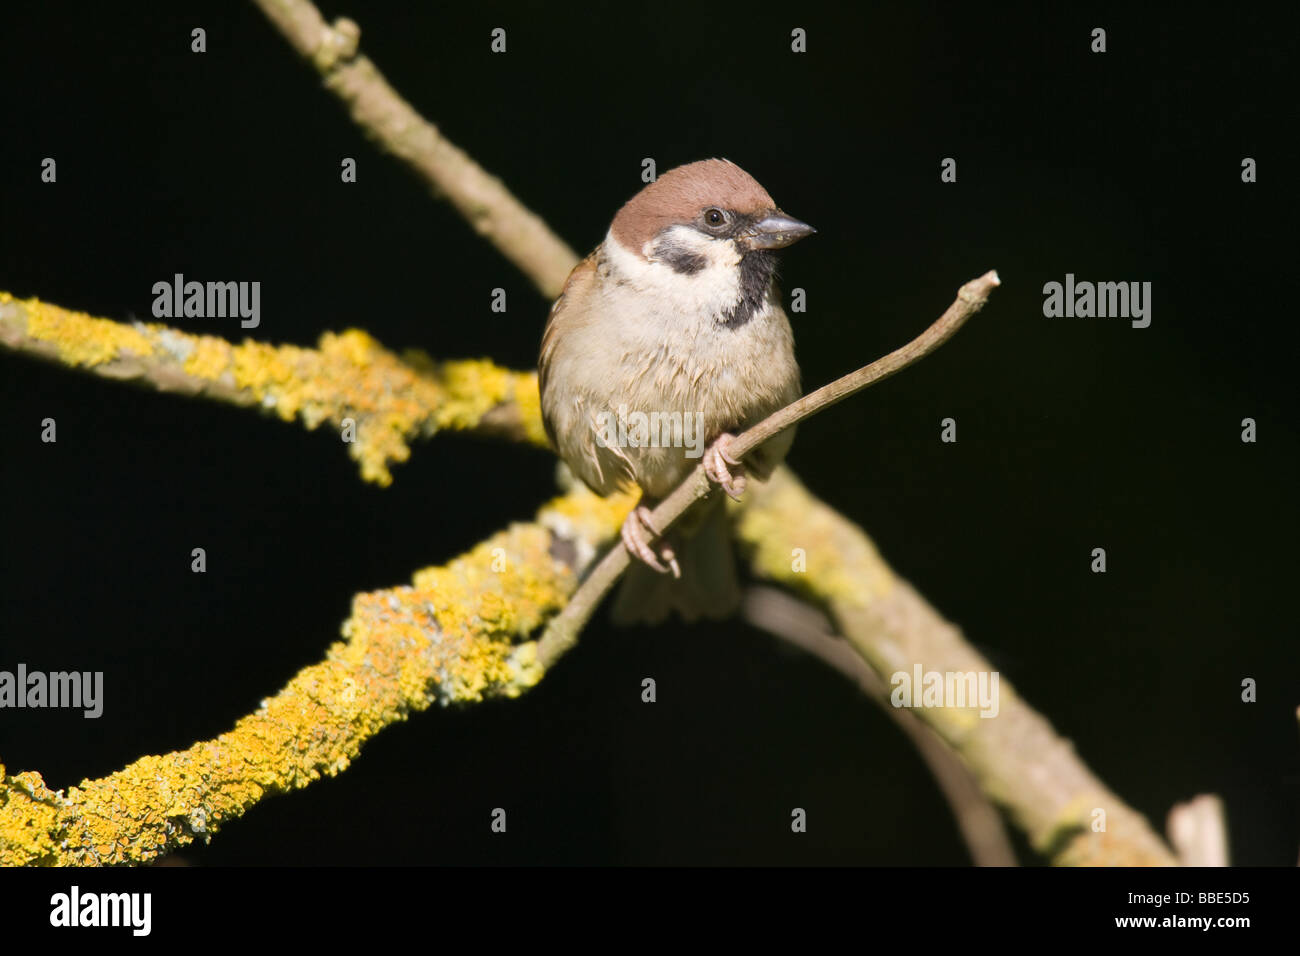 Adult Eurasian Tree Sparrow (Passer montanus) perched on lichen covered branch Stock Photo